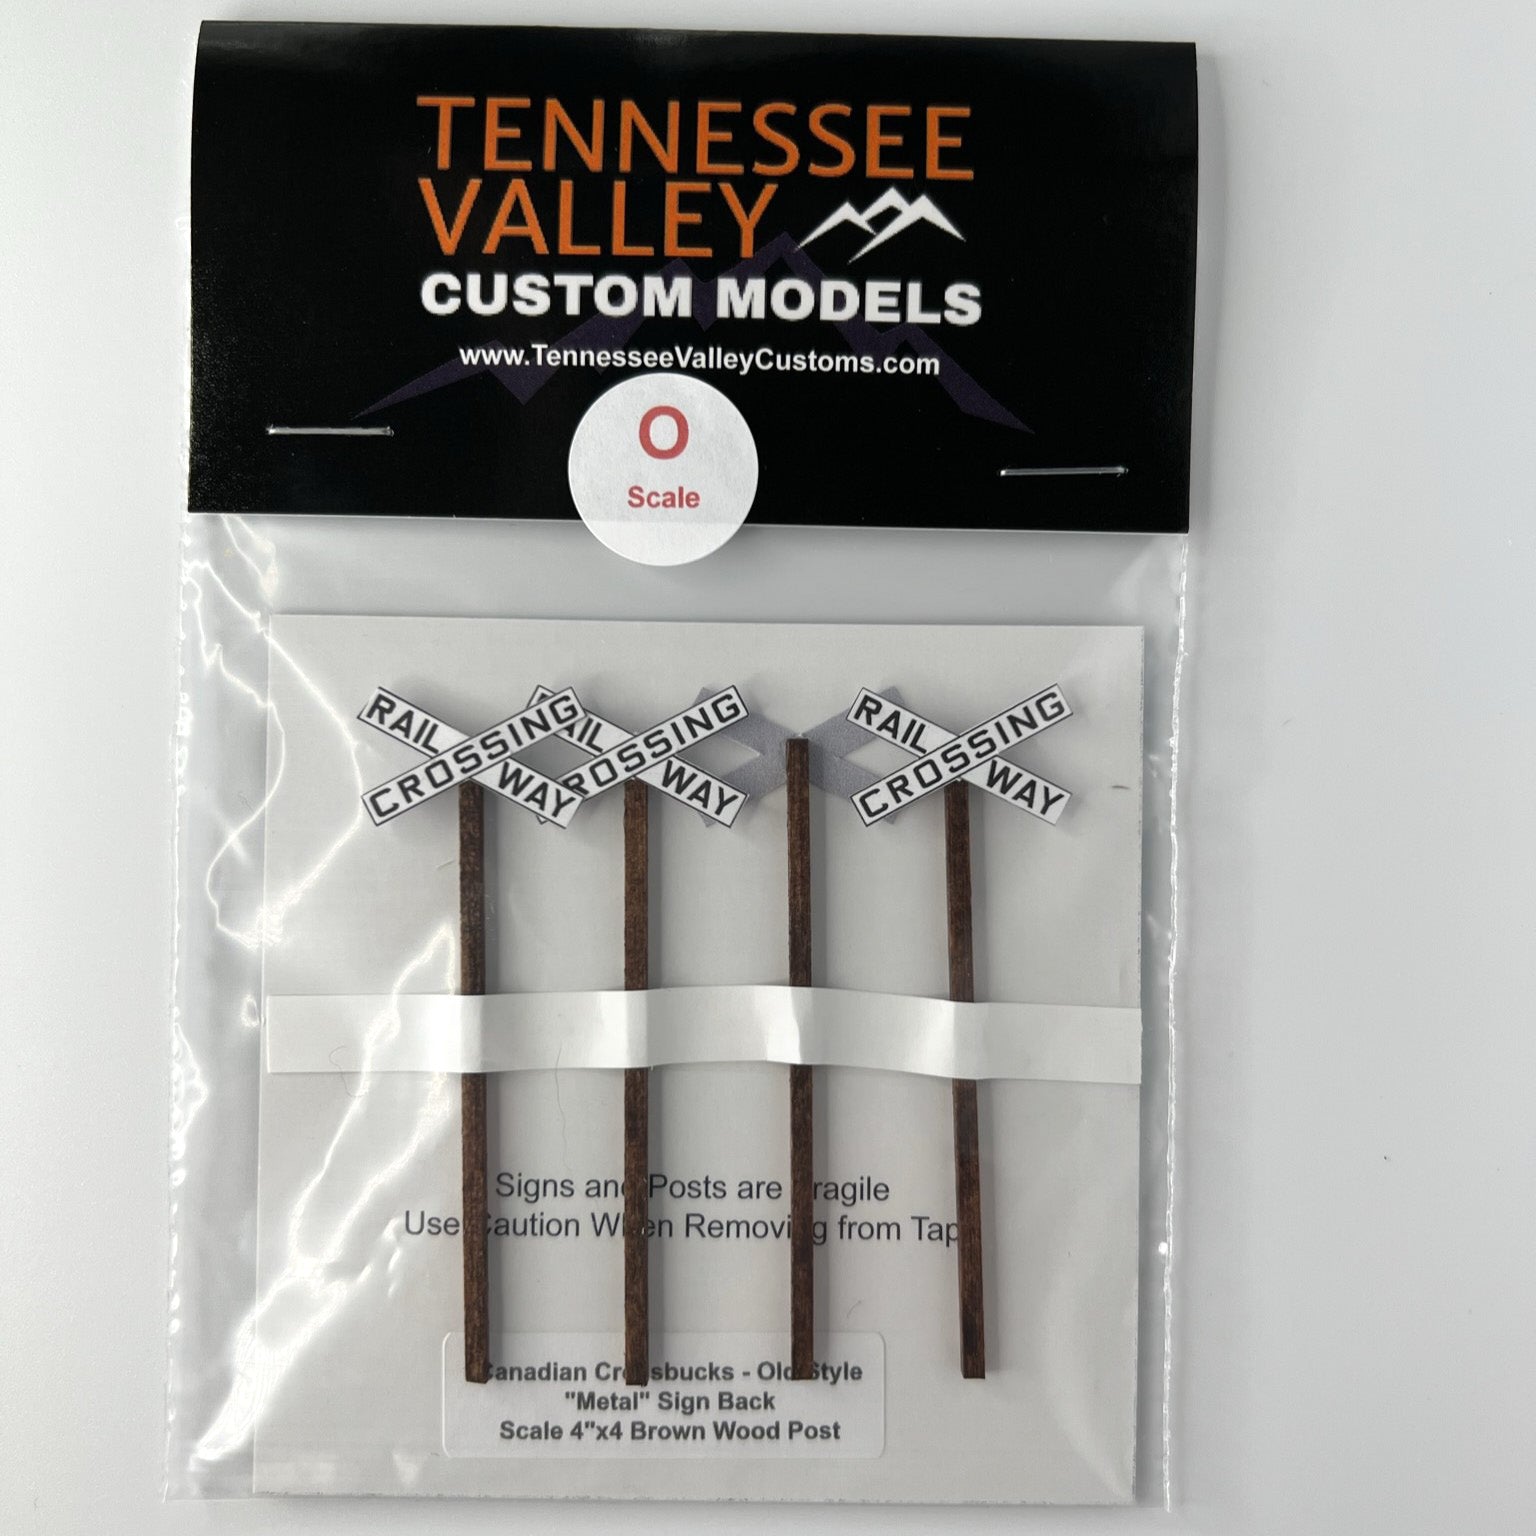 Model Railroad Old Style Canadian Railway Crossing Crossbucks O Scale package of four with brown wood poles